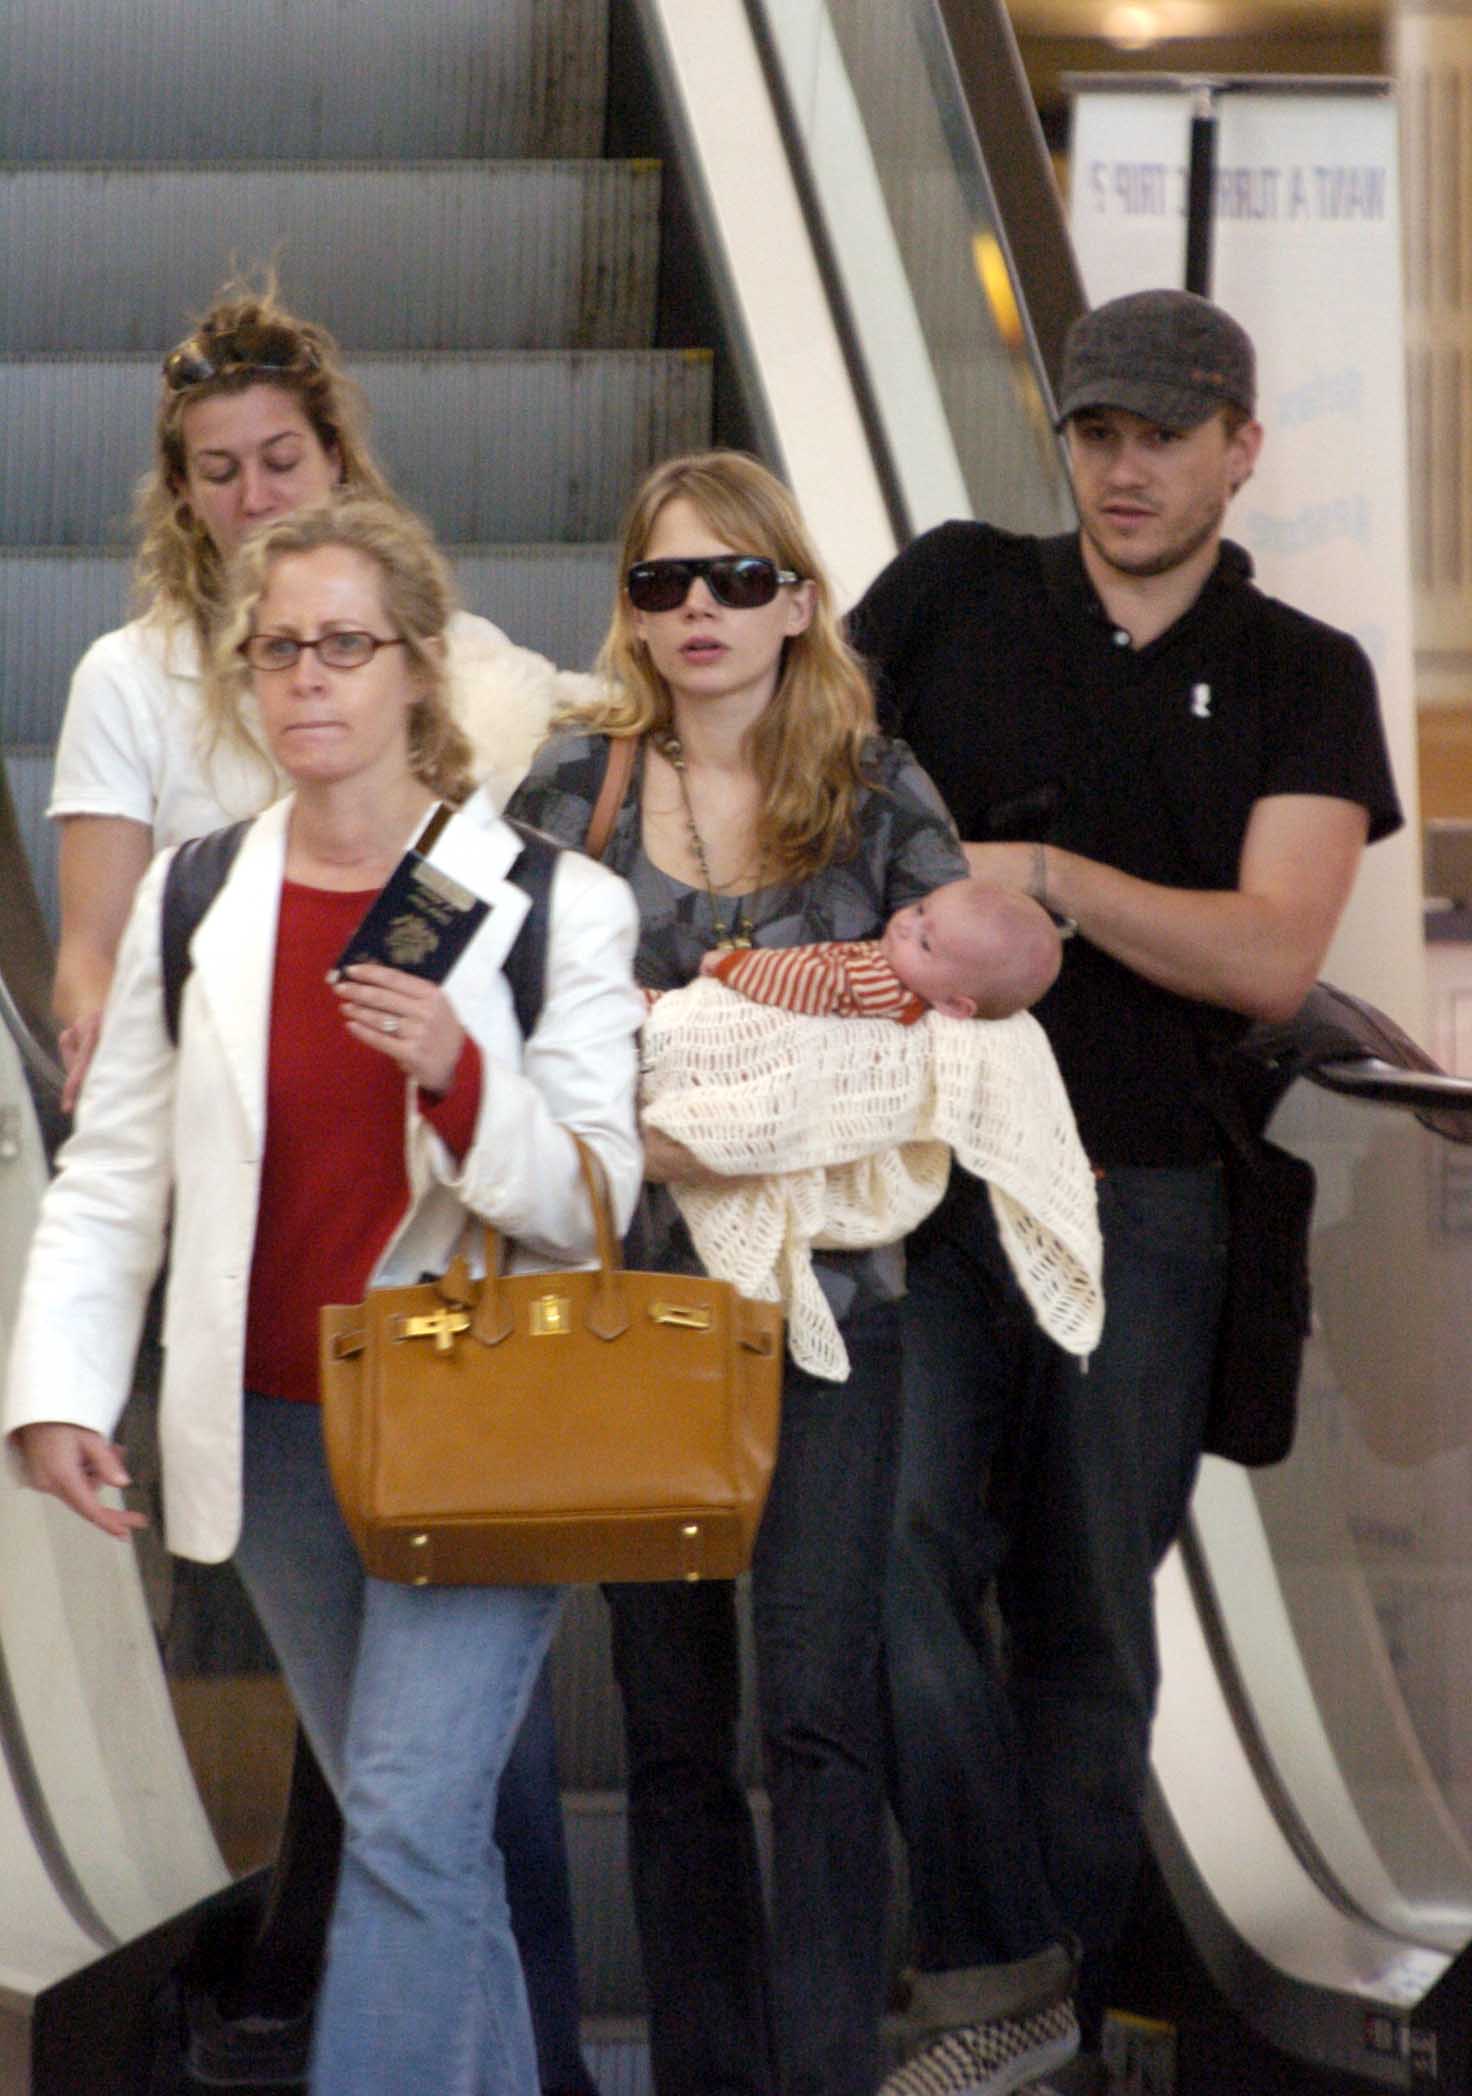 Heath Ledger and Michelle Williams with their daughter Matilda Rose Ledger in Sydney, Australia on January 14, 2006 | Source: Getty Images